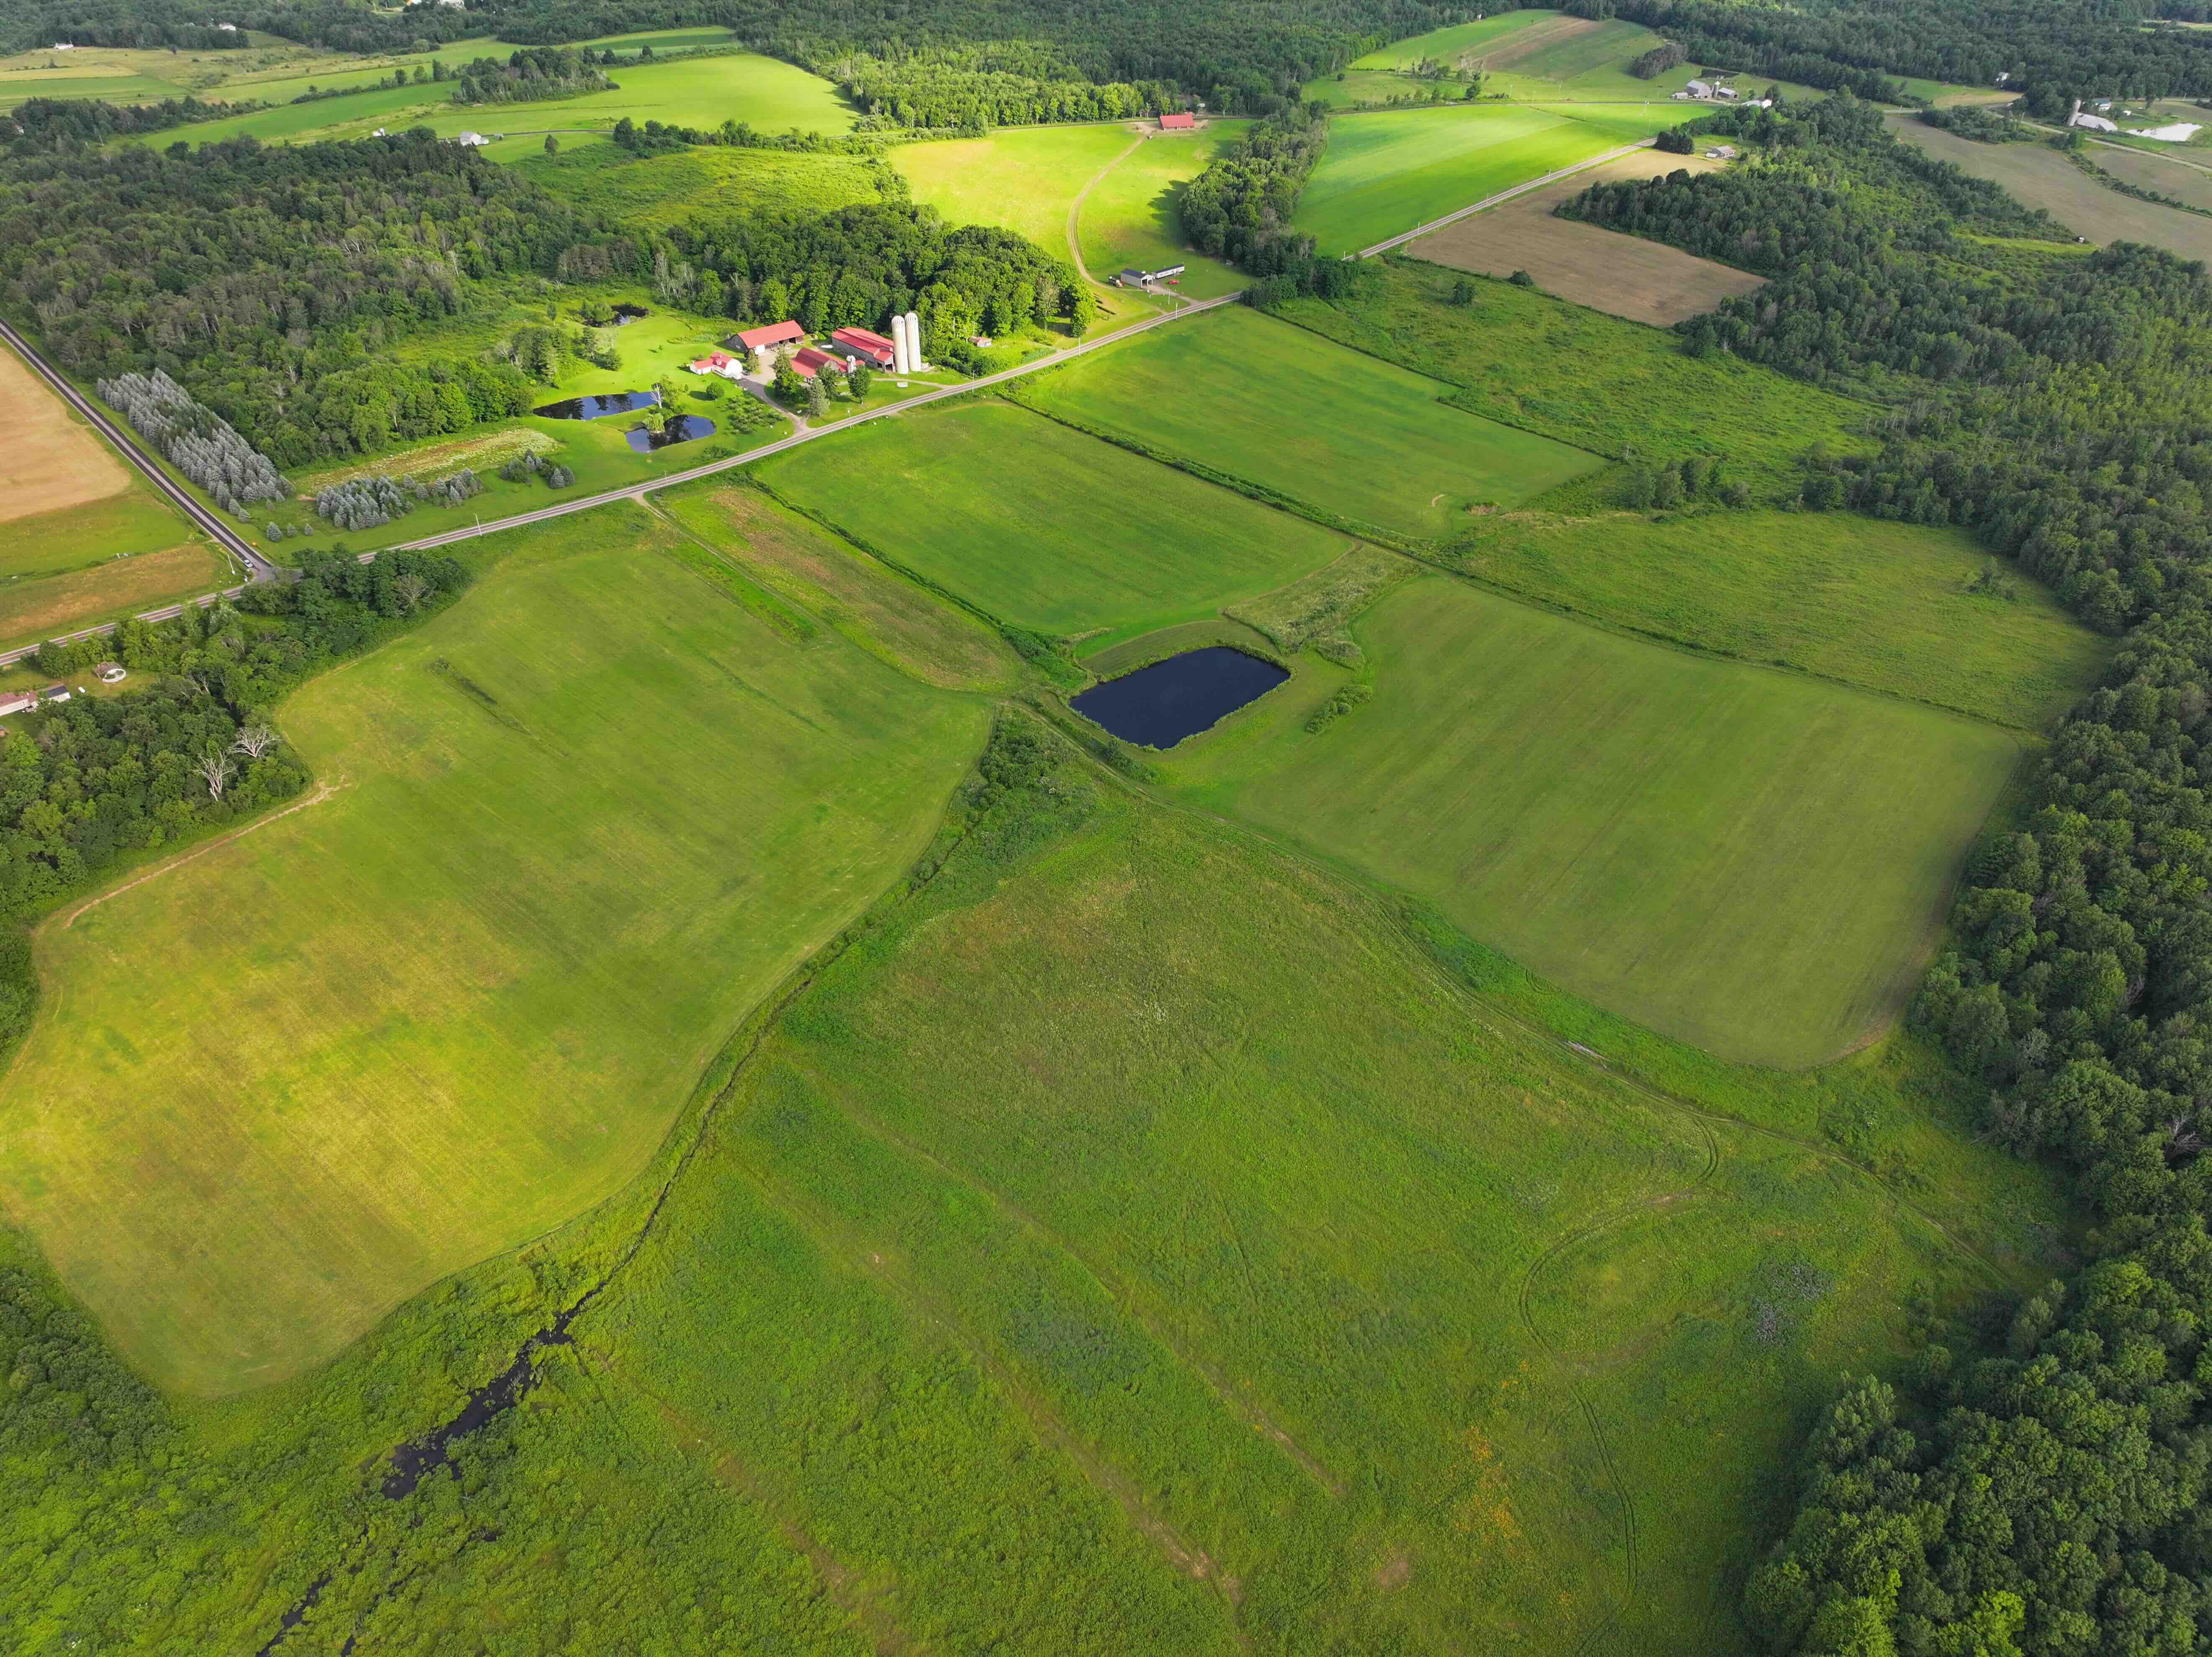 252 acre Farm with House, Barns, Gas Wells and Ponds in Dewittville NY 7057 Beech Hill Rd